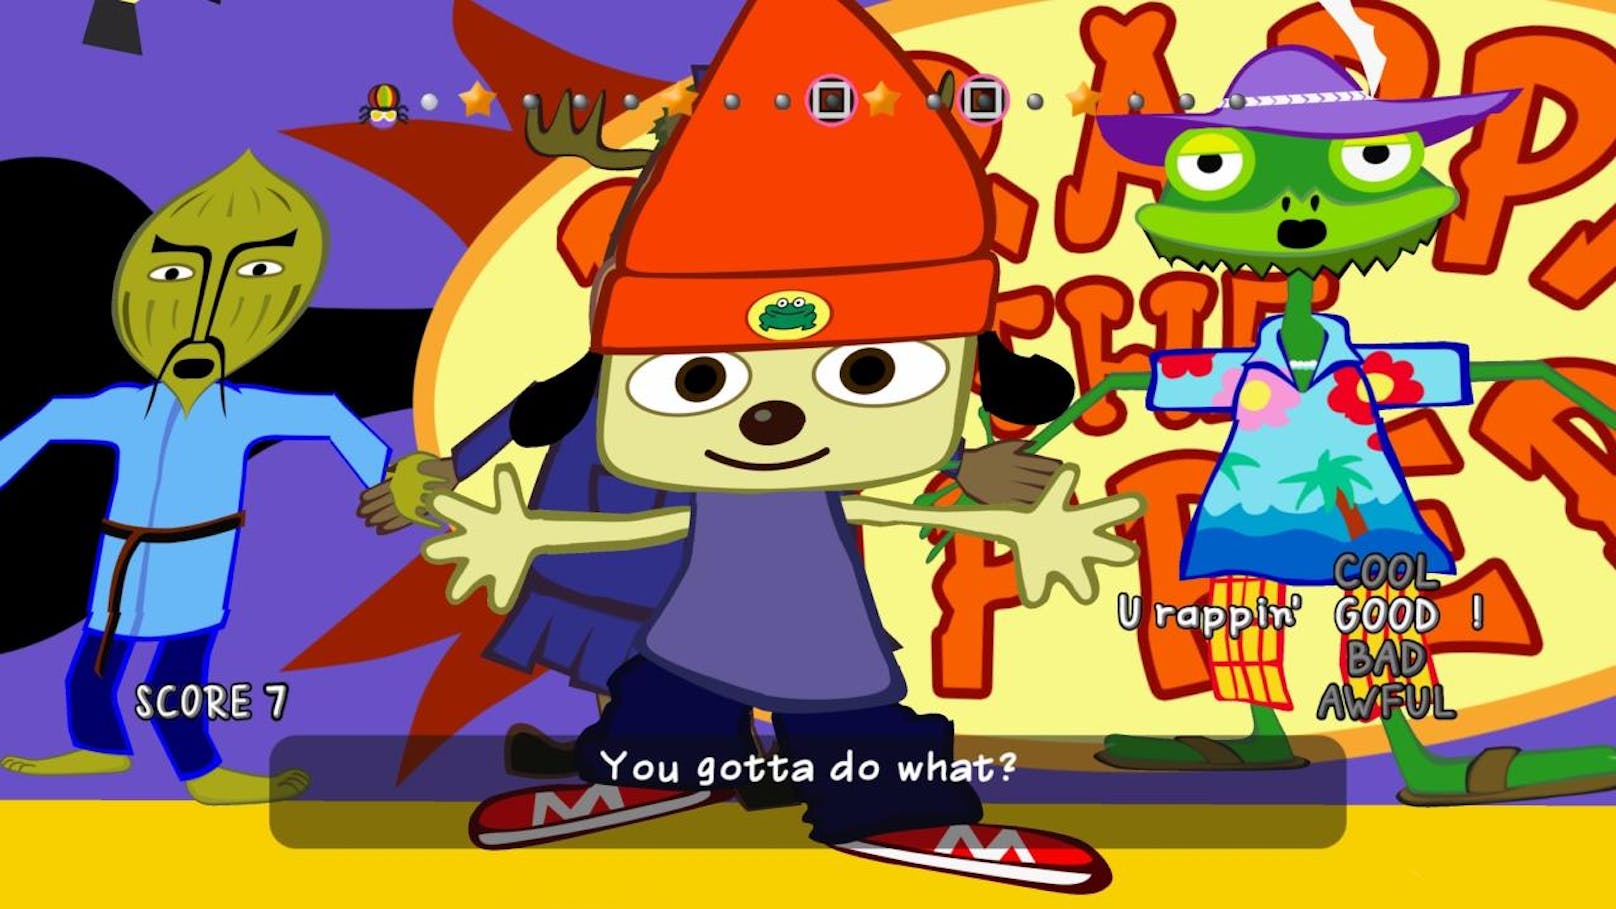  <a href="https://www.heute.at/digital/games/story/PaRappa-the-Rapper-Remastered-im-Test-53338748" target="_blank">PaRappa the Rapper Remastered</a>